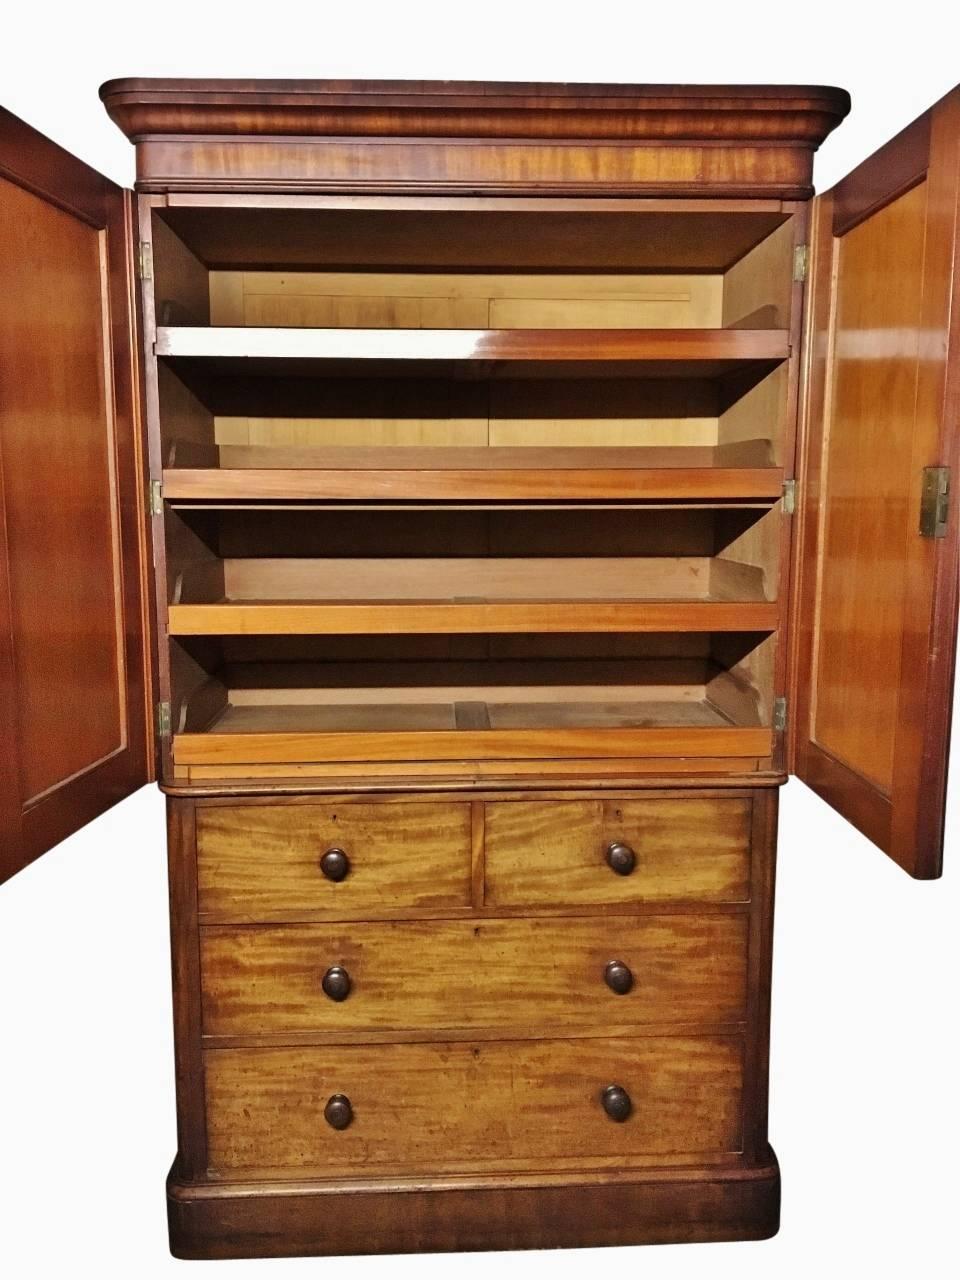 Lovely old Mahogany Linen press from the circa 1860s in very good condition.
There's loads of useful storage and this has four smoothly running drawers of good depth.
The top section has well figured panelled doors enclosing four sliding trays,